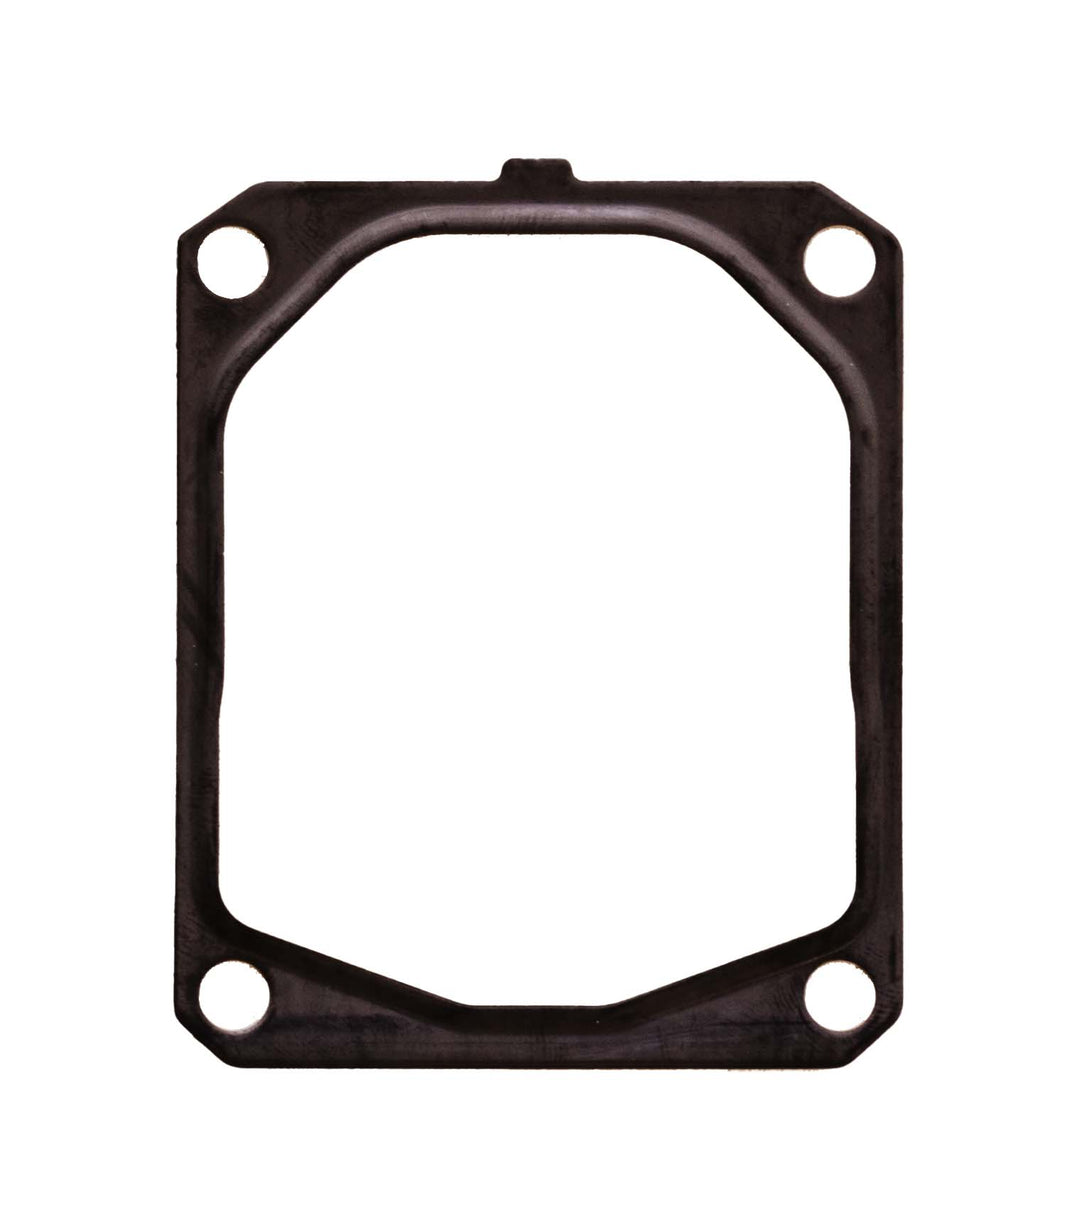 DUKE'S CYLINDER AND EXHAUST GASKETS FITS STIHL MS461 1128 029 2310 1125 149 0601